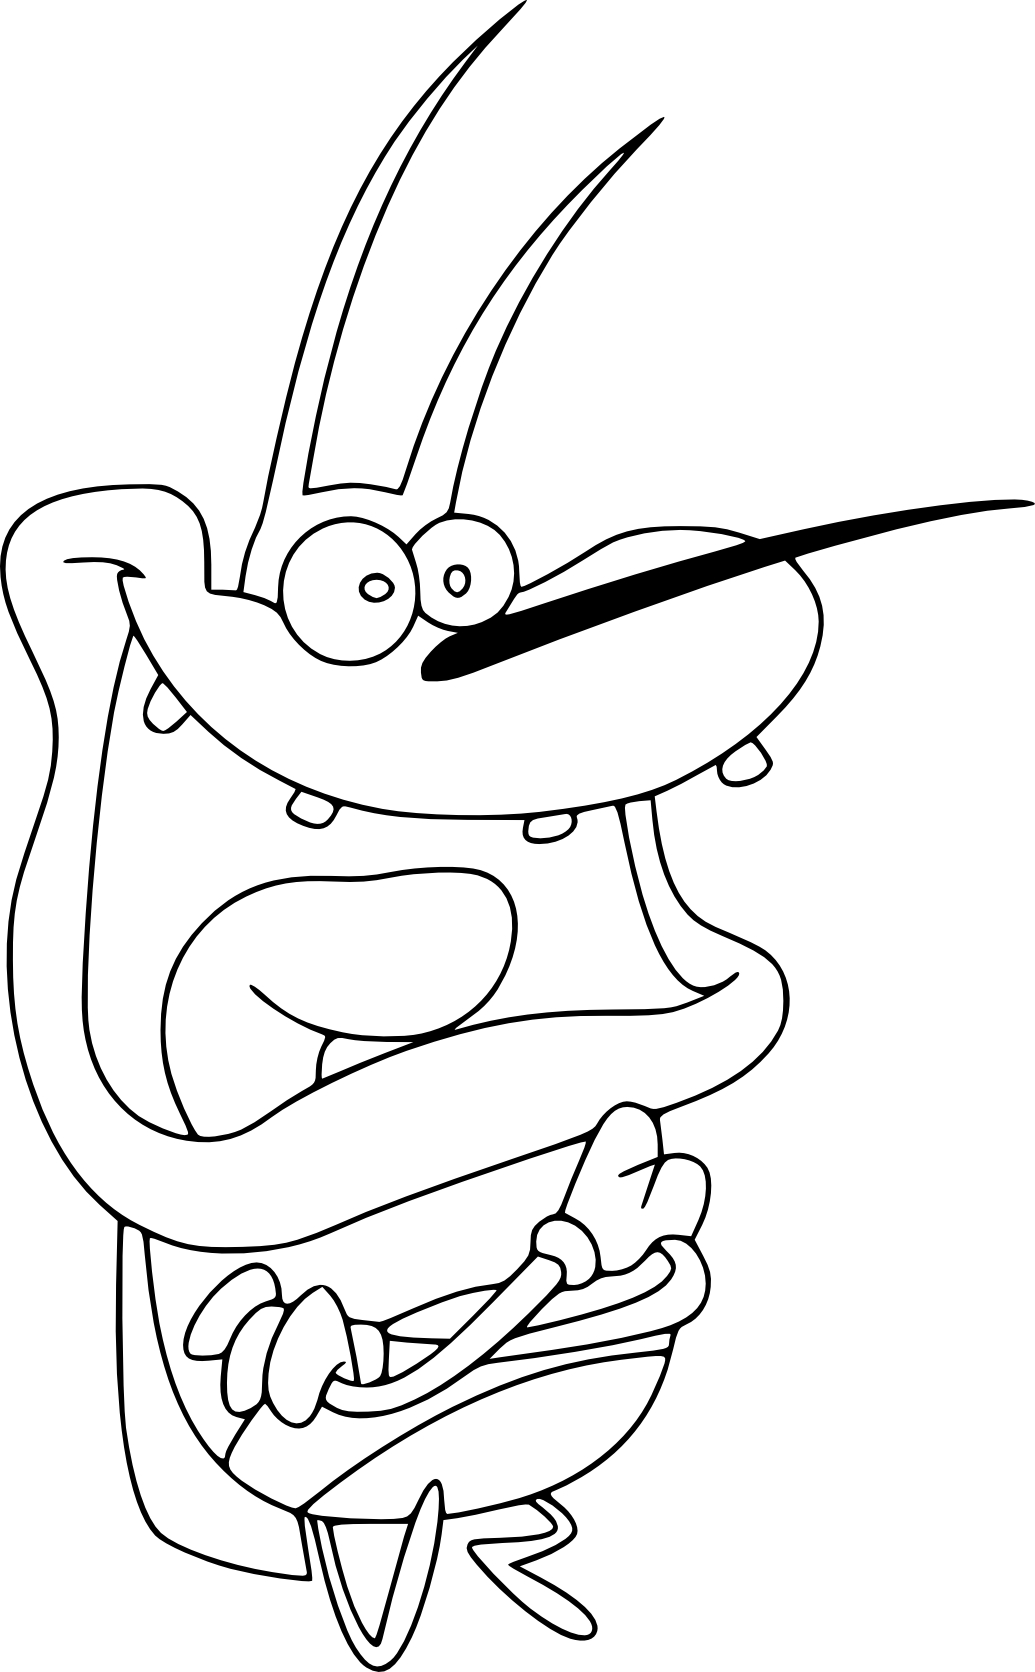 Dee Dee Oggy And The Cockroaches coloring page